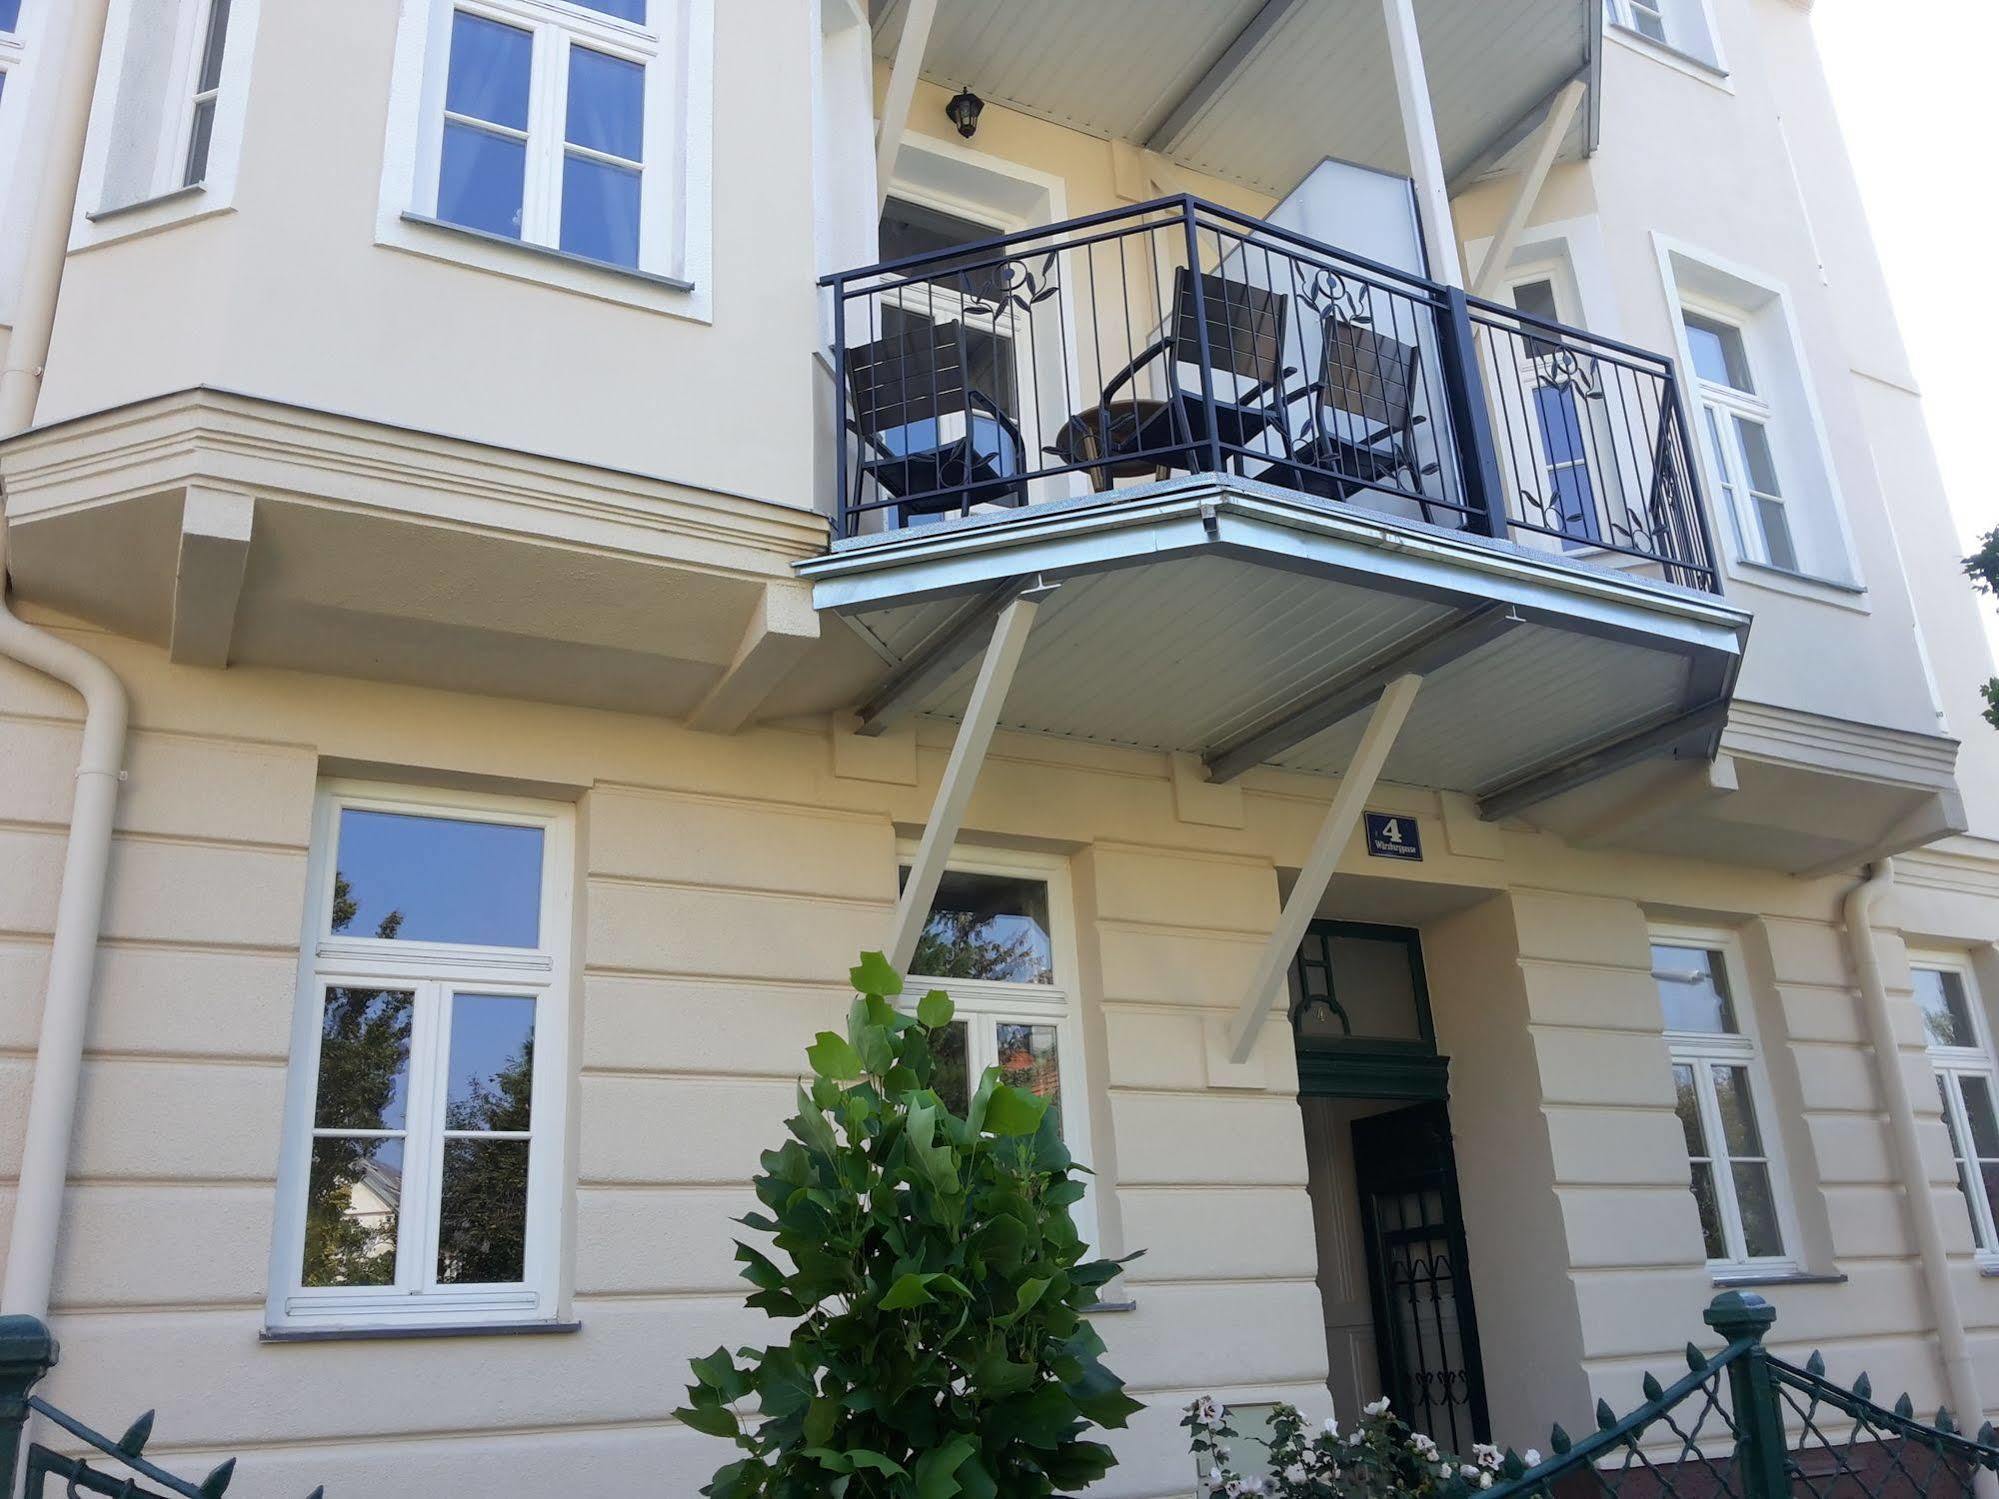 Imperial Apartments Schonbrunn - Contactless Check-In ウィーン エクステリア 写真